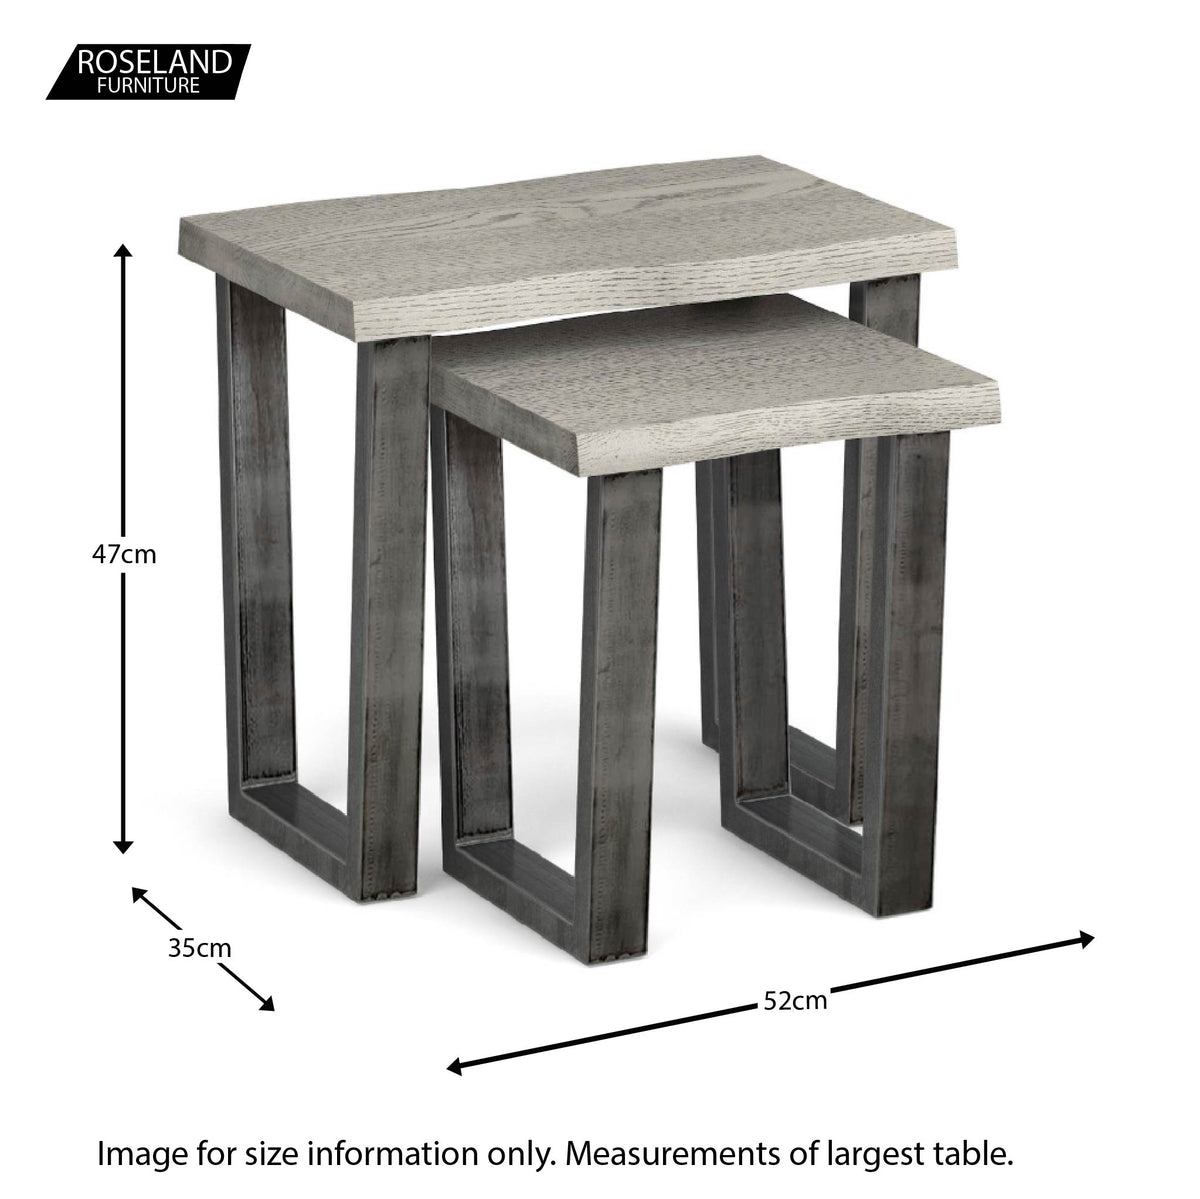 Dimensions for The Soho Grey Industrial Wood & Metal Nest of Tables